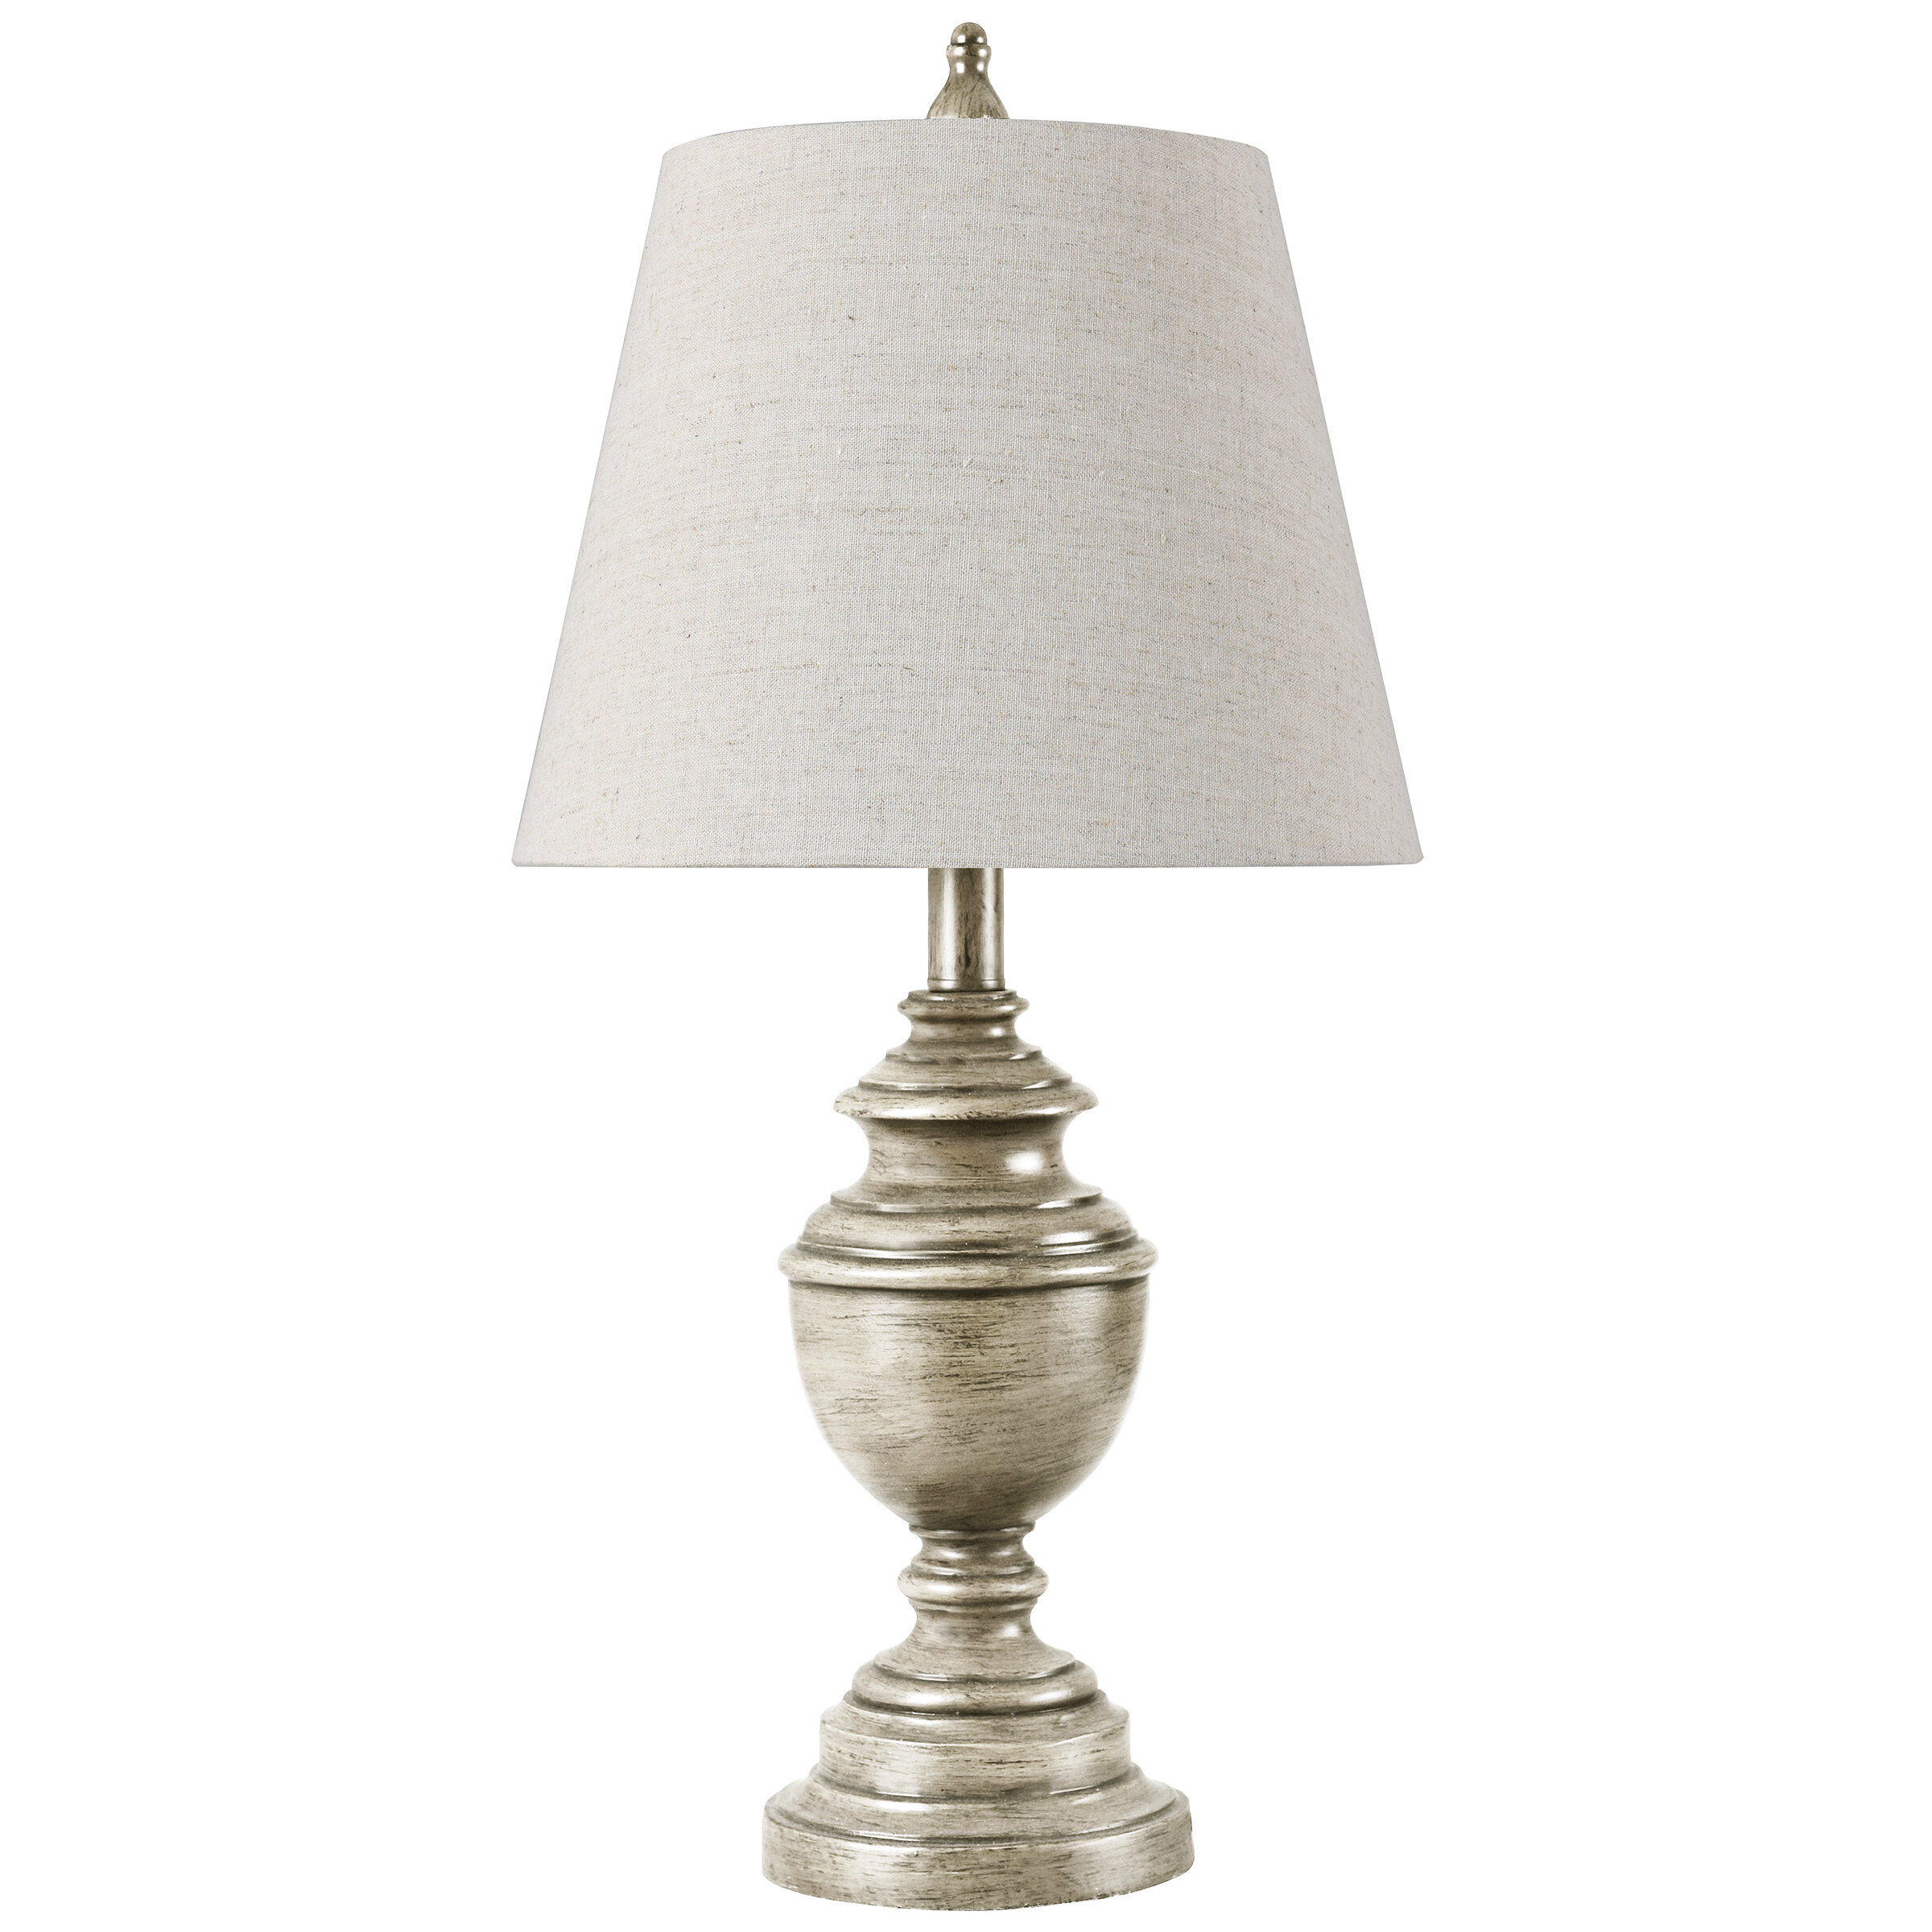 16" Ceramic Boudoir Table Lamp with Square Fabric Beaded Shade  Cream Color 